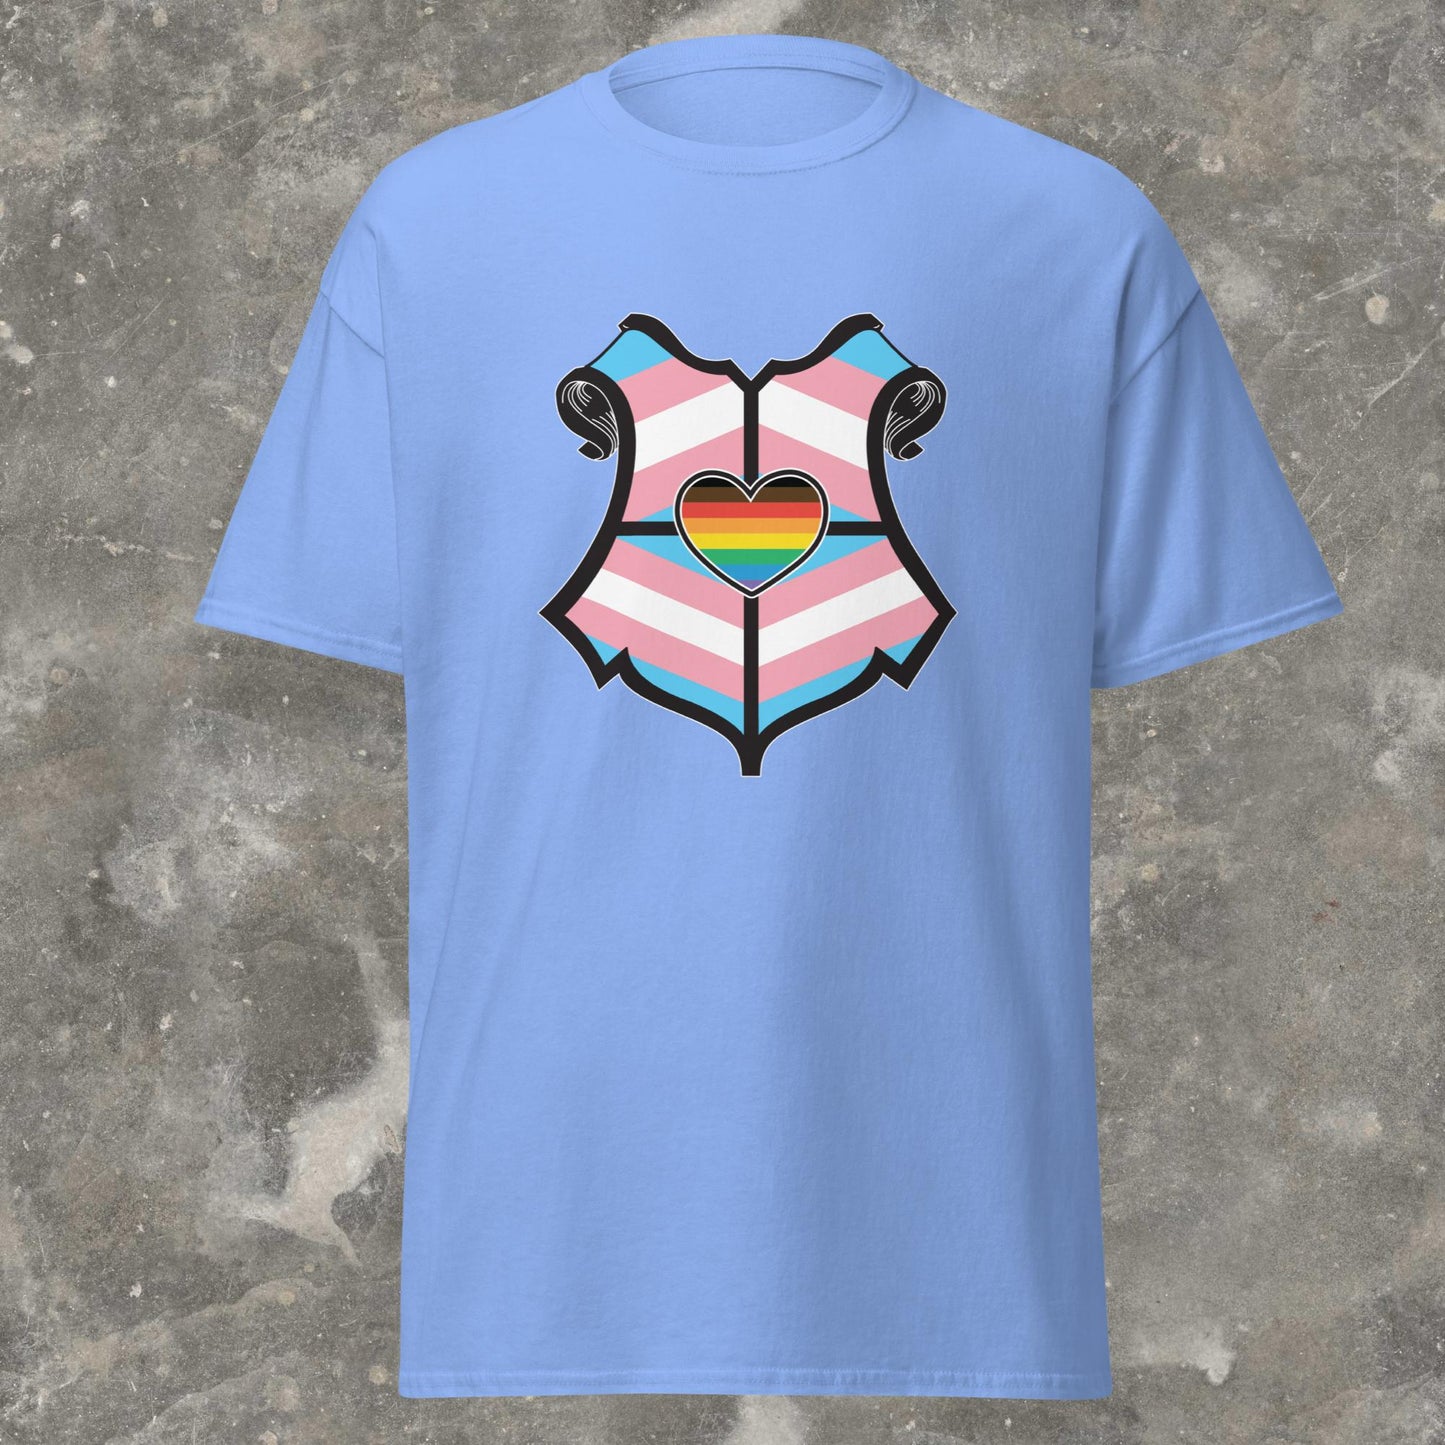 Wizards for Trans Rights House Shield Gender Neutral classic tee